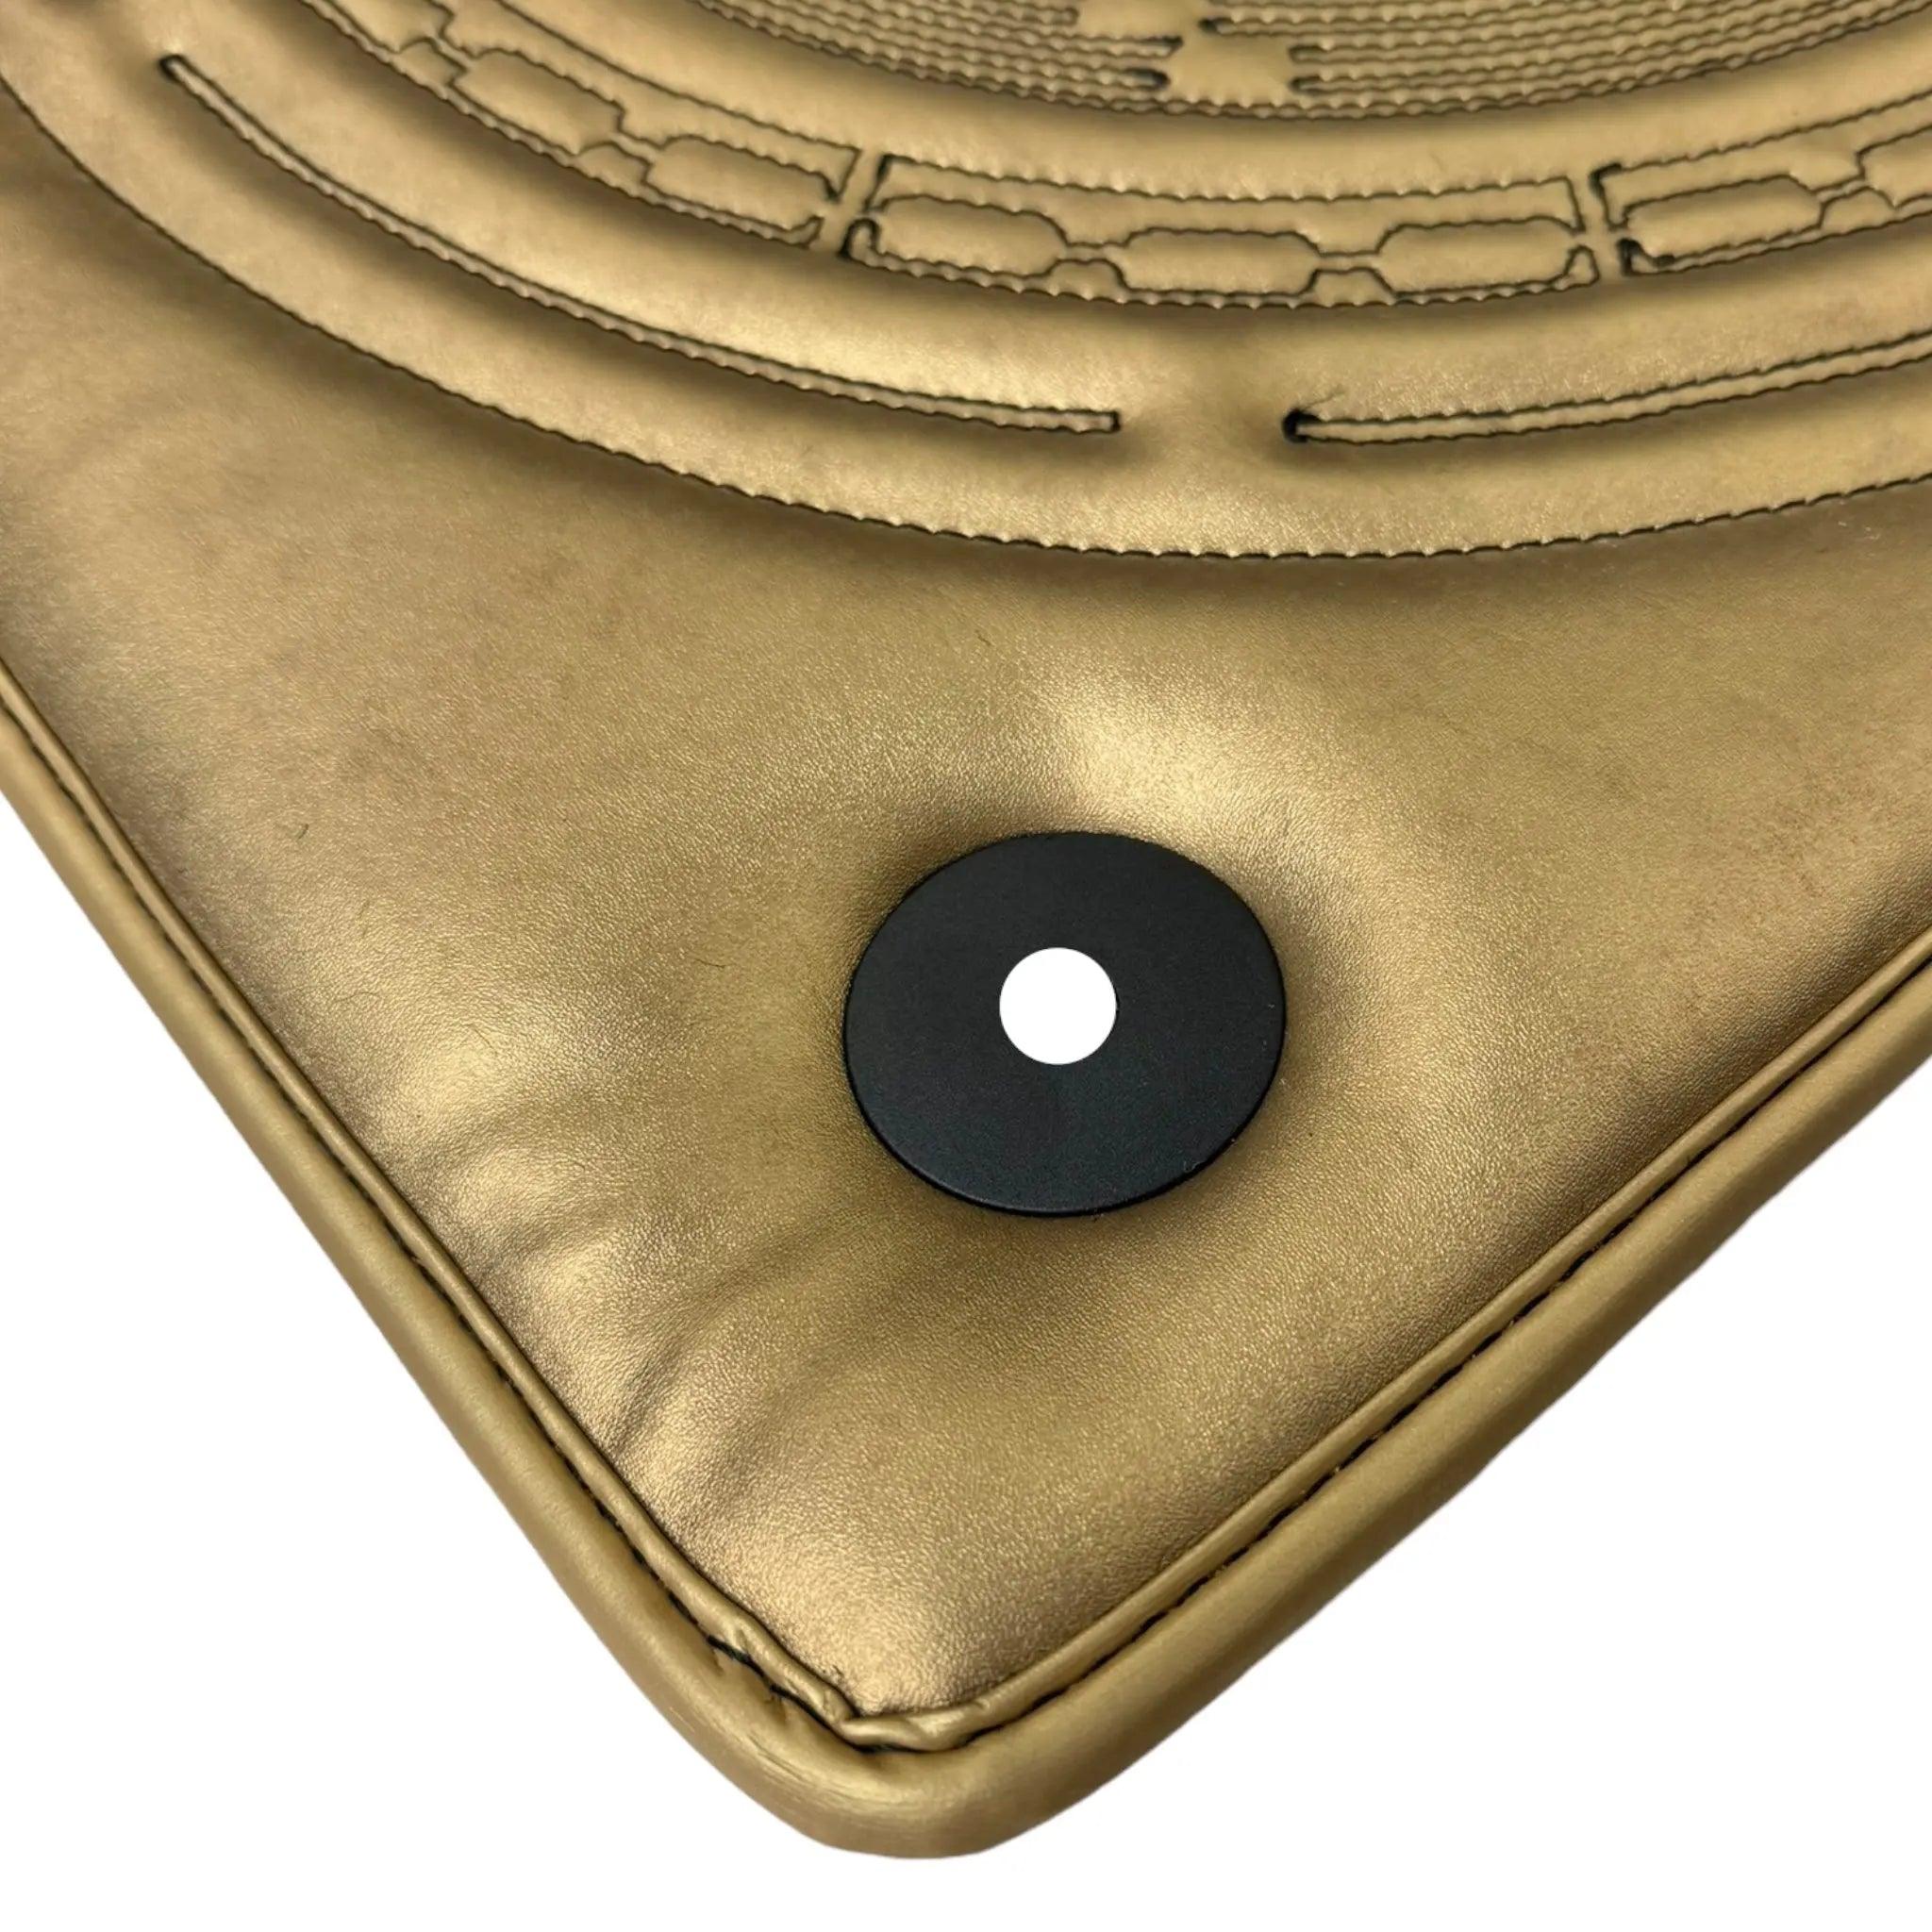 Golden Leather Floor Mats for Lamborghini Aventador with "Bitcoin" Sewing